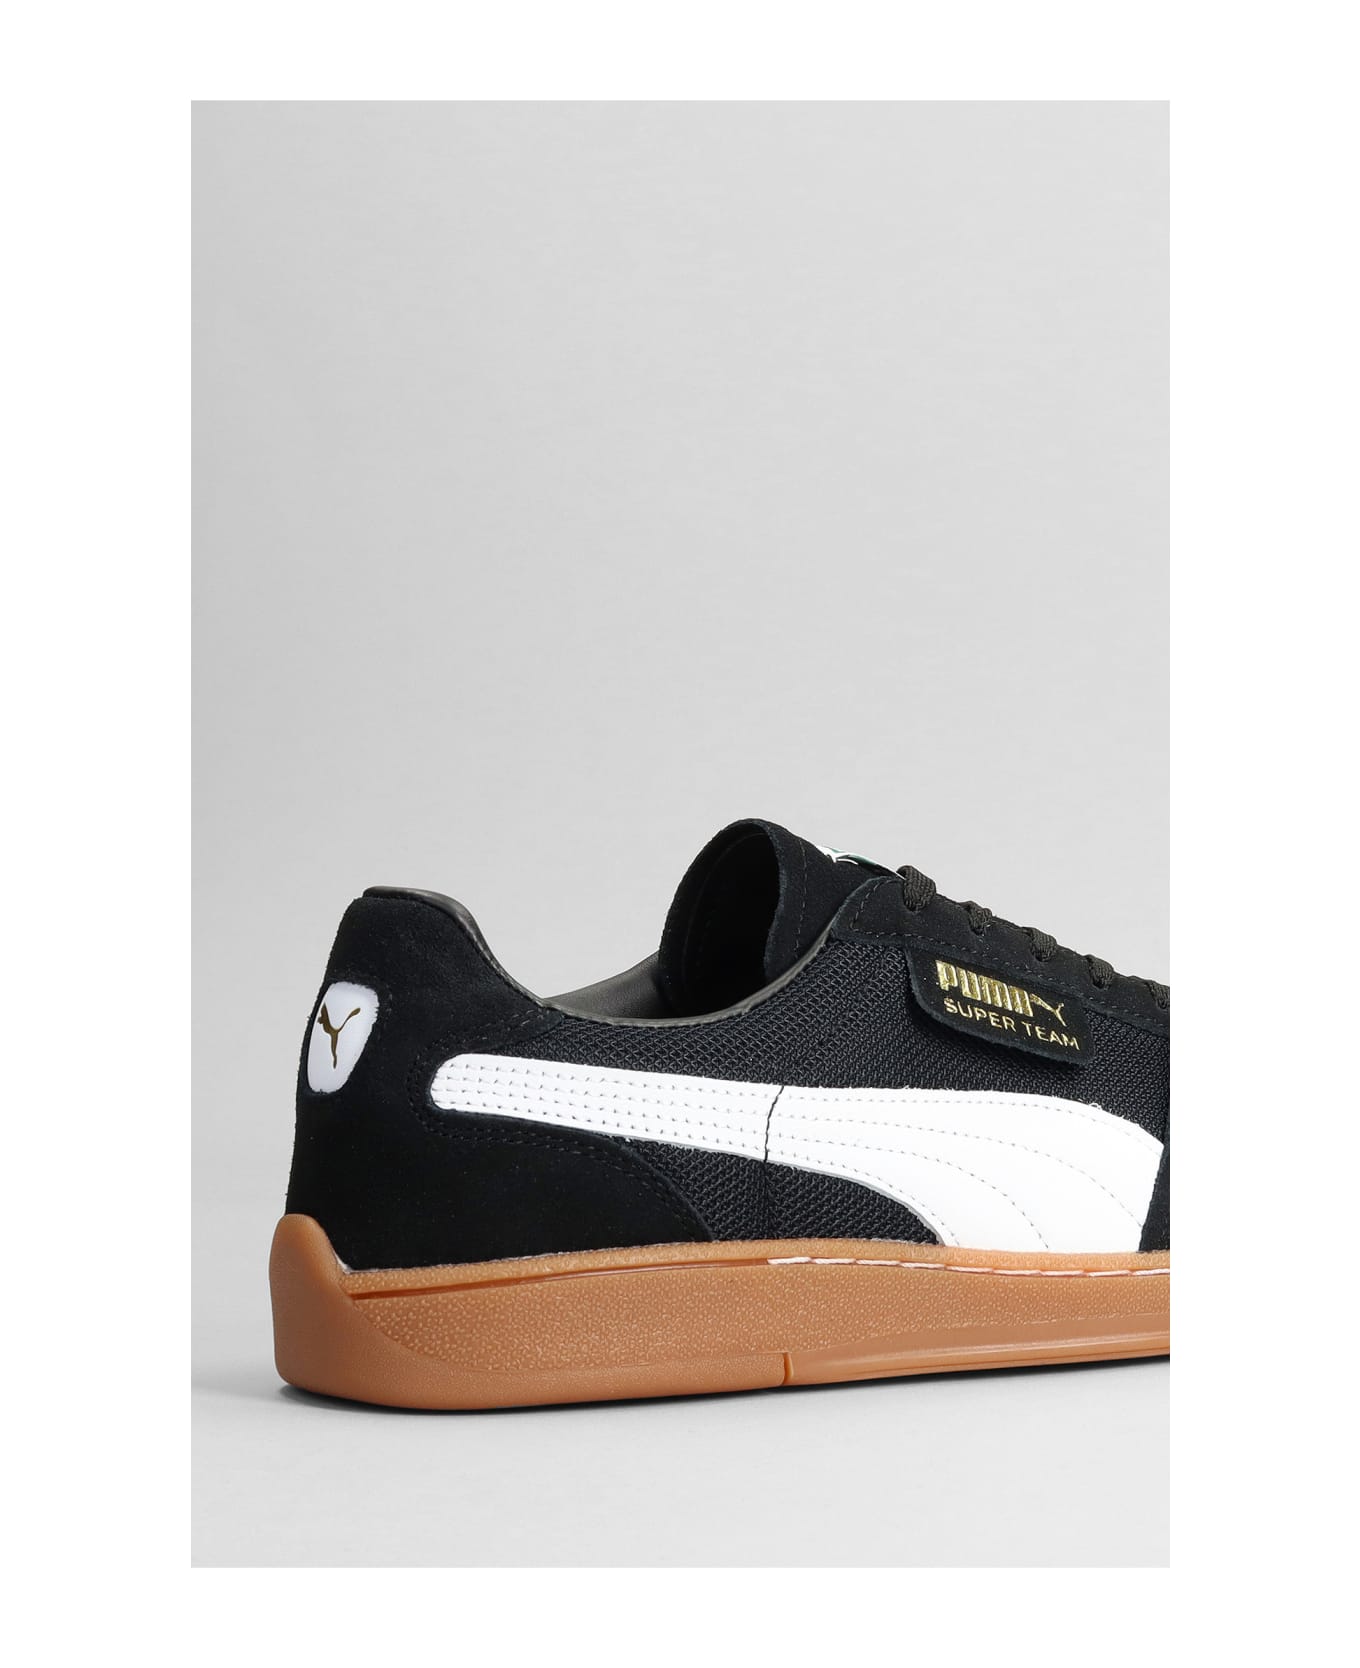 Puma Super Team Og Sneakers In Black Suede And Fabric - BLACK/WHITE